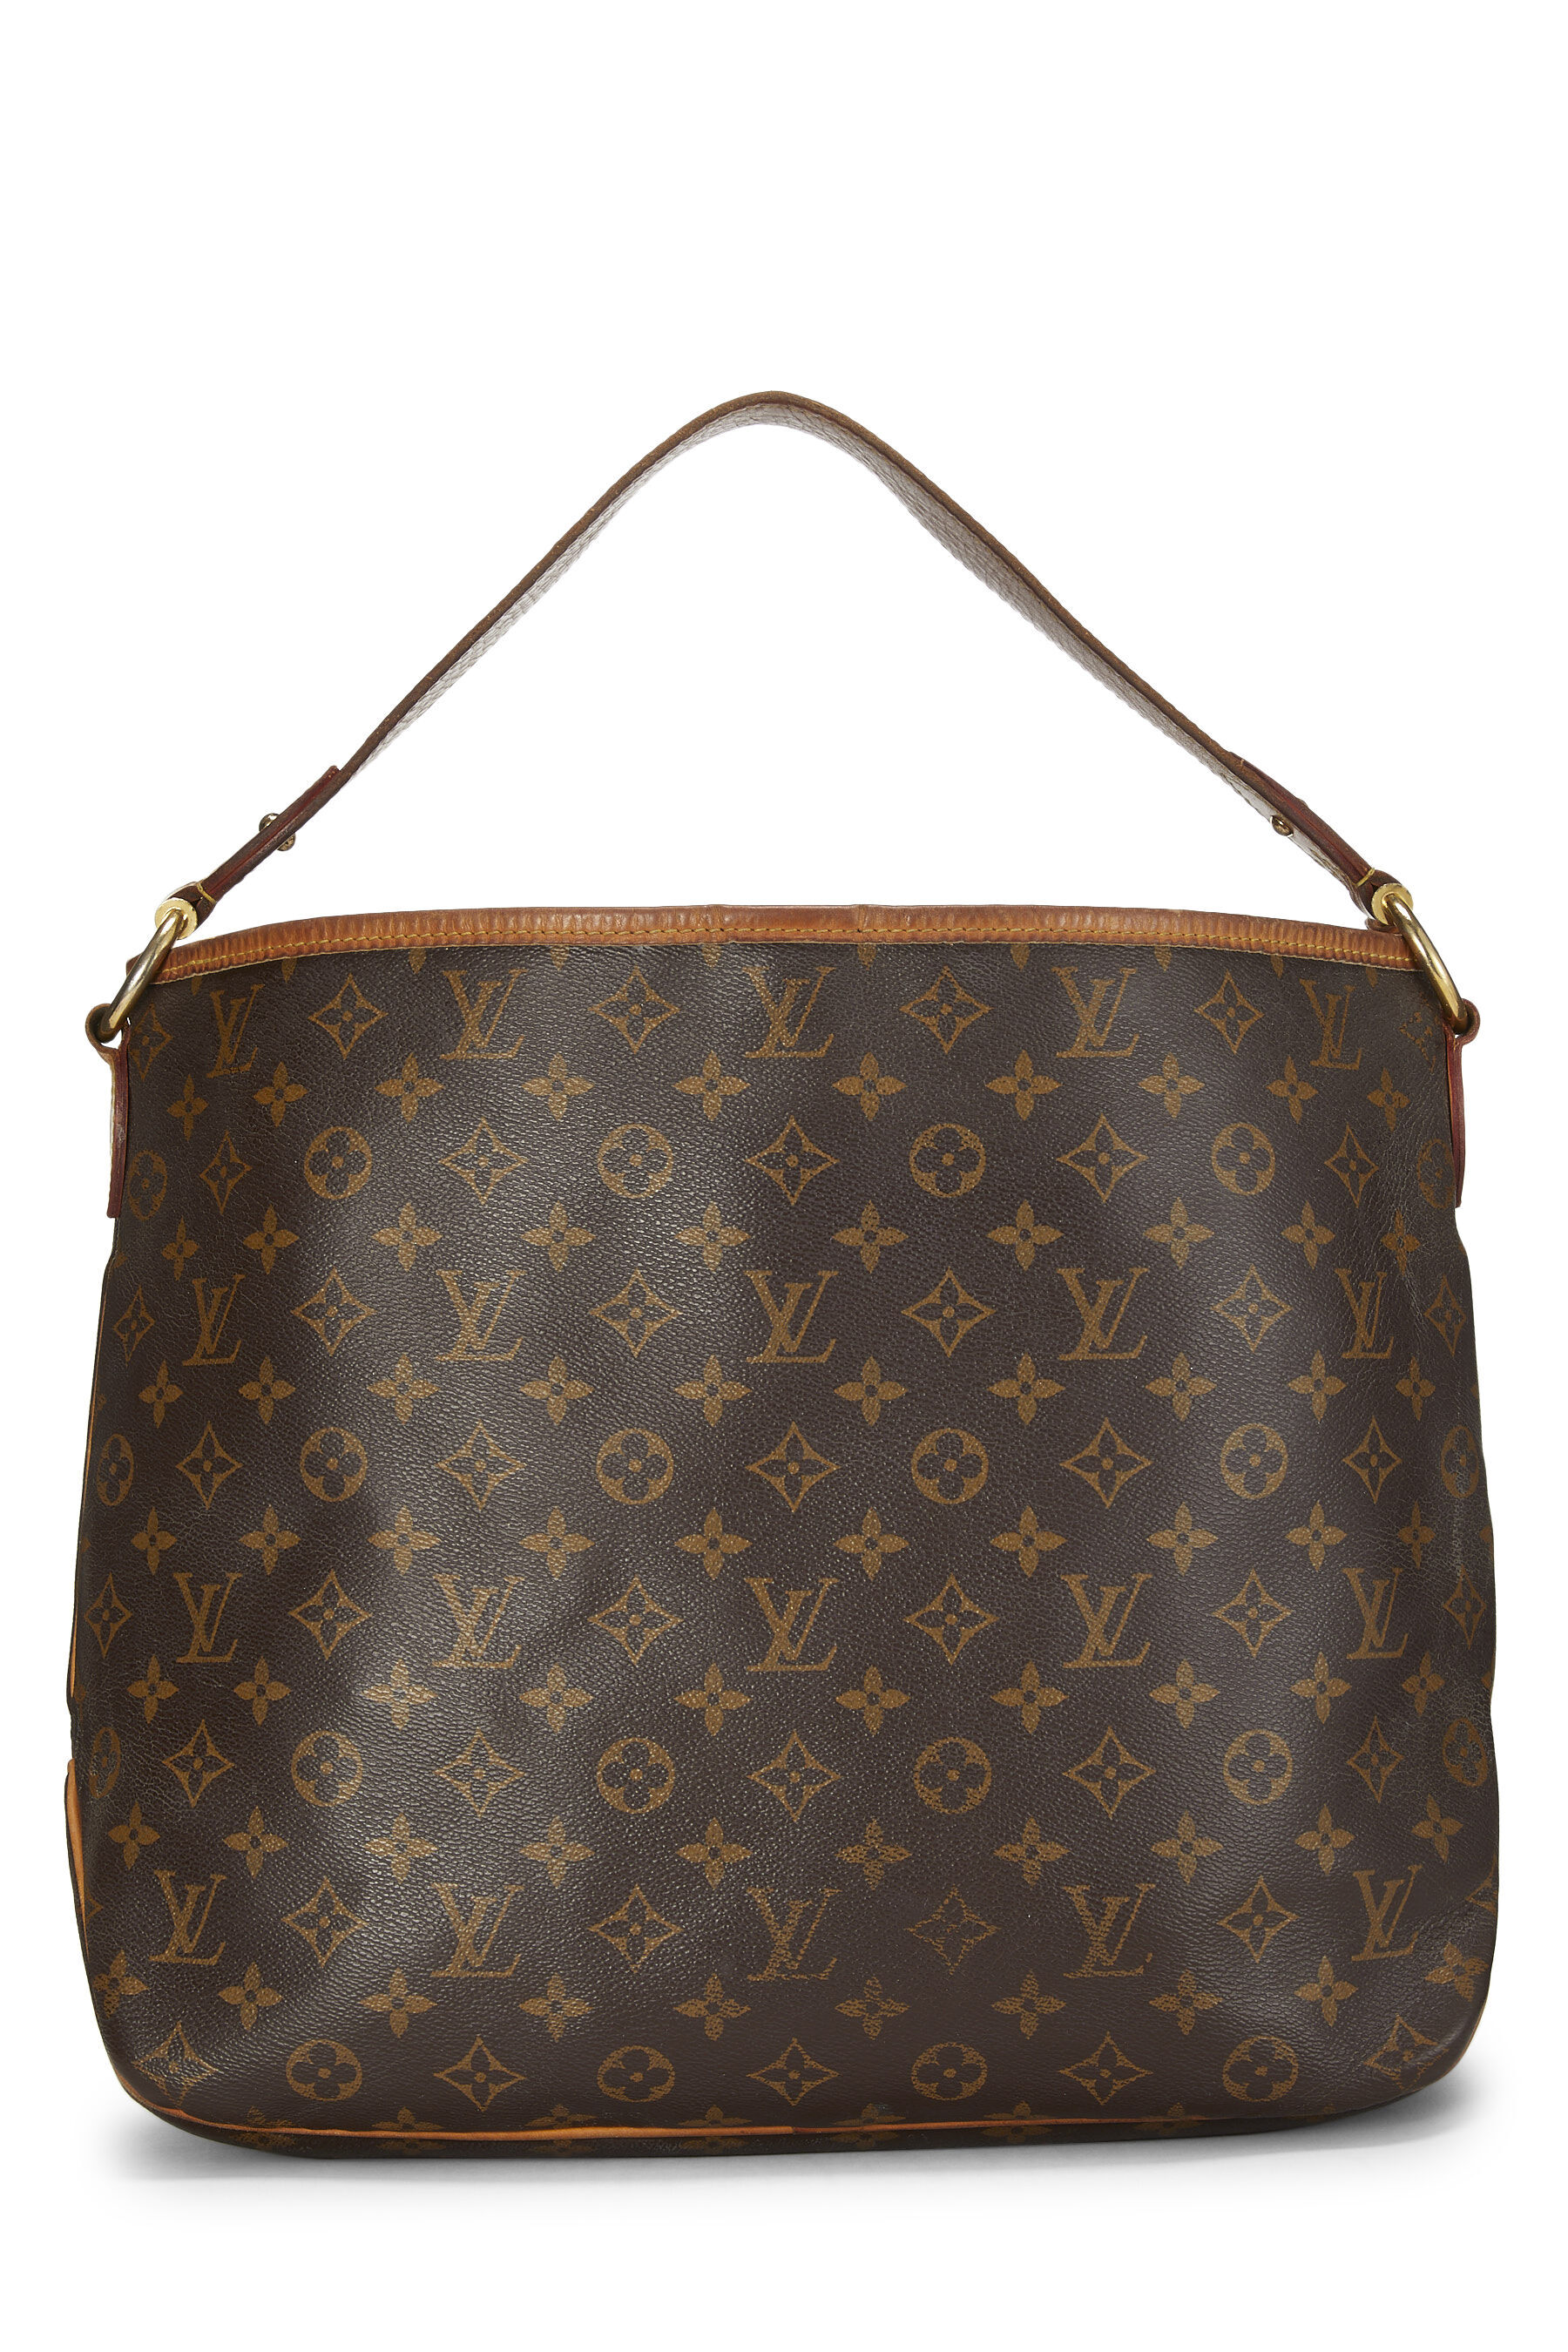 Fancy a Louis Vuitton Bag by Your Favorite Contemporary Artist A Charity  Auction With Sothebys Offers a Chance to Snag One for a Cause